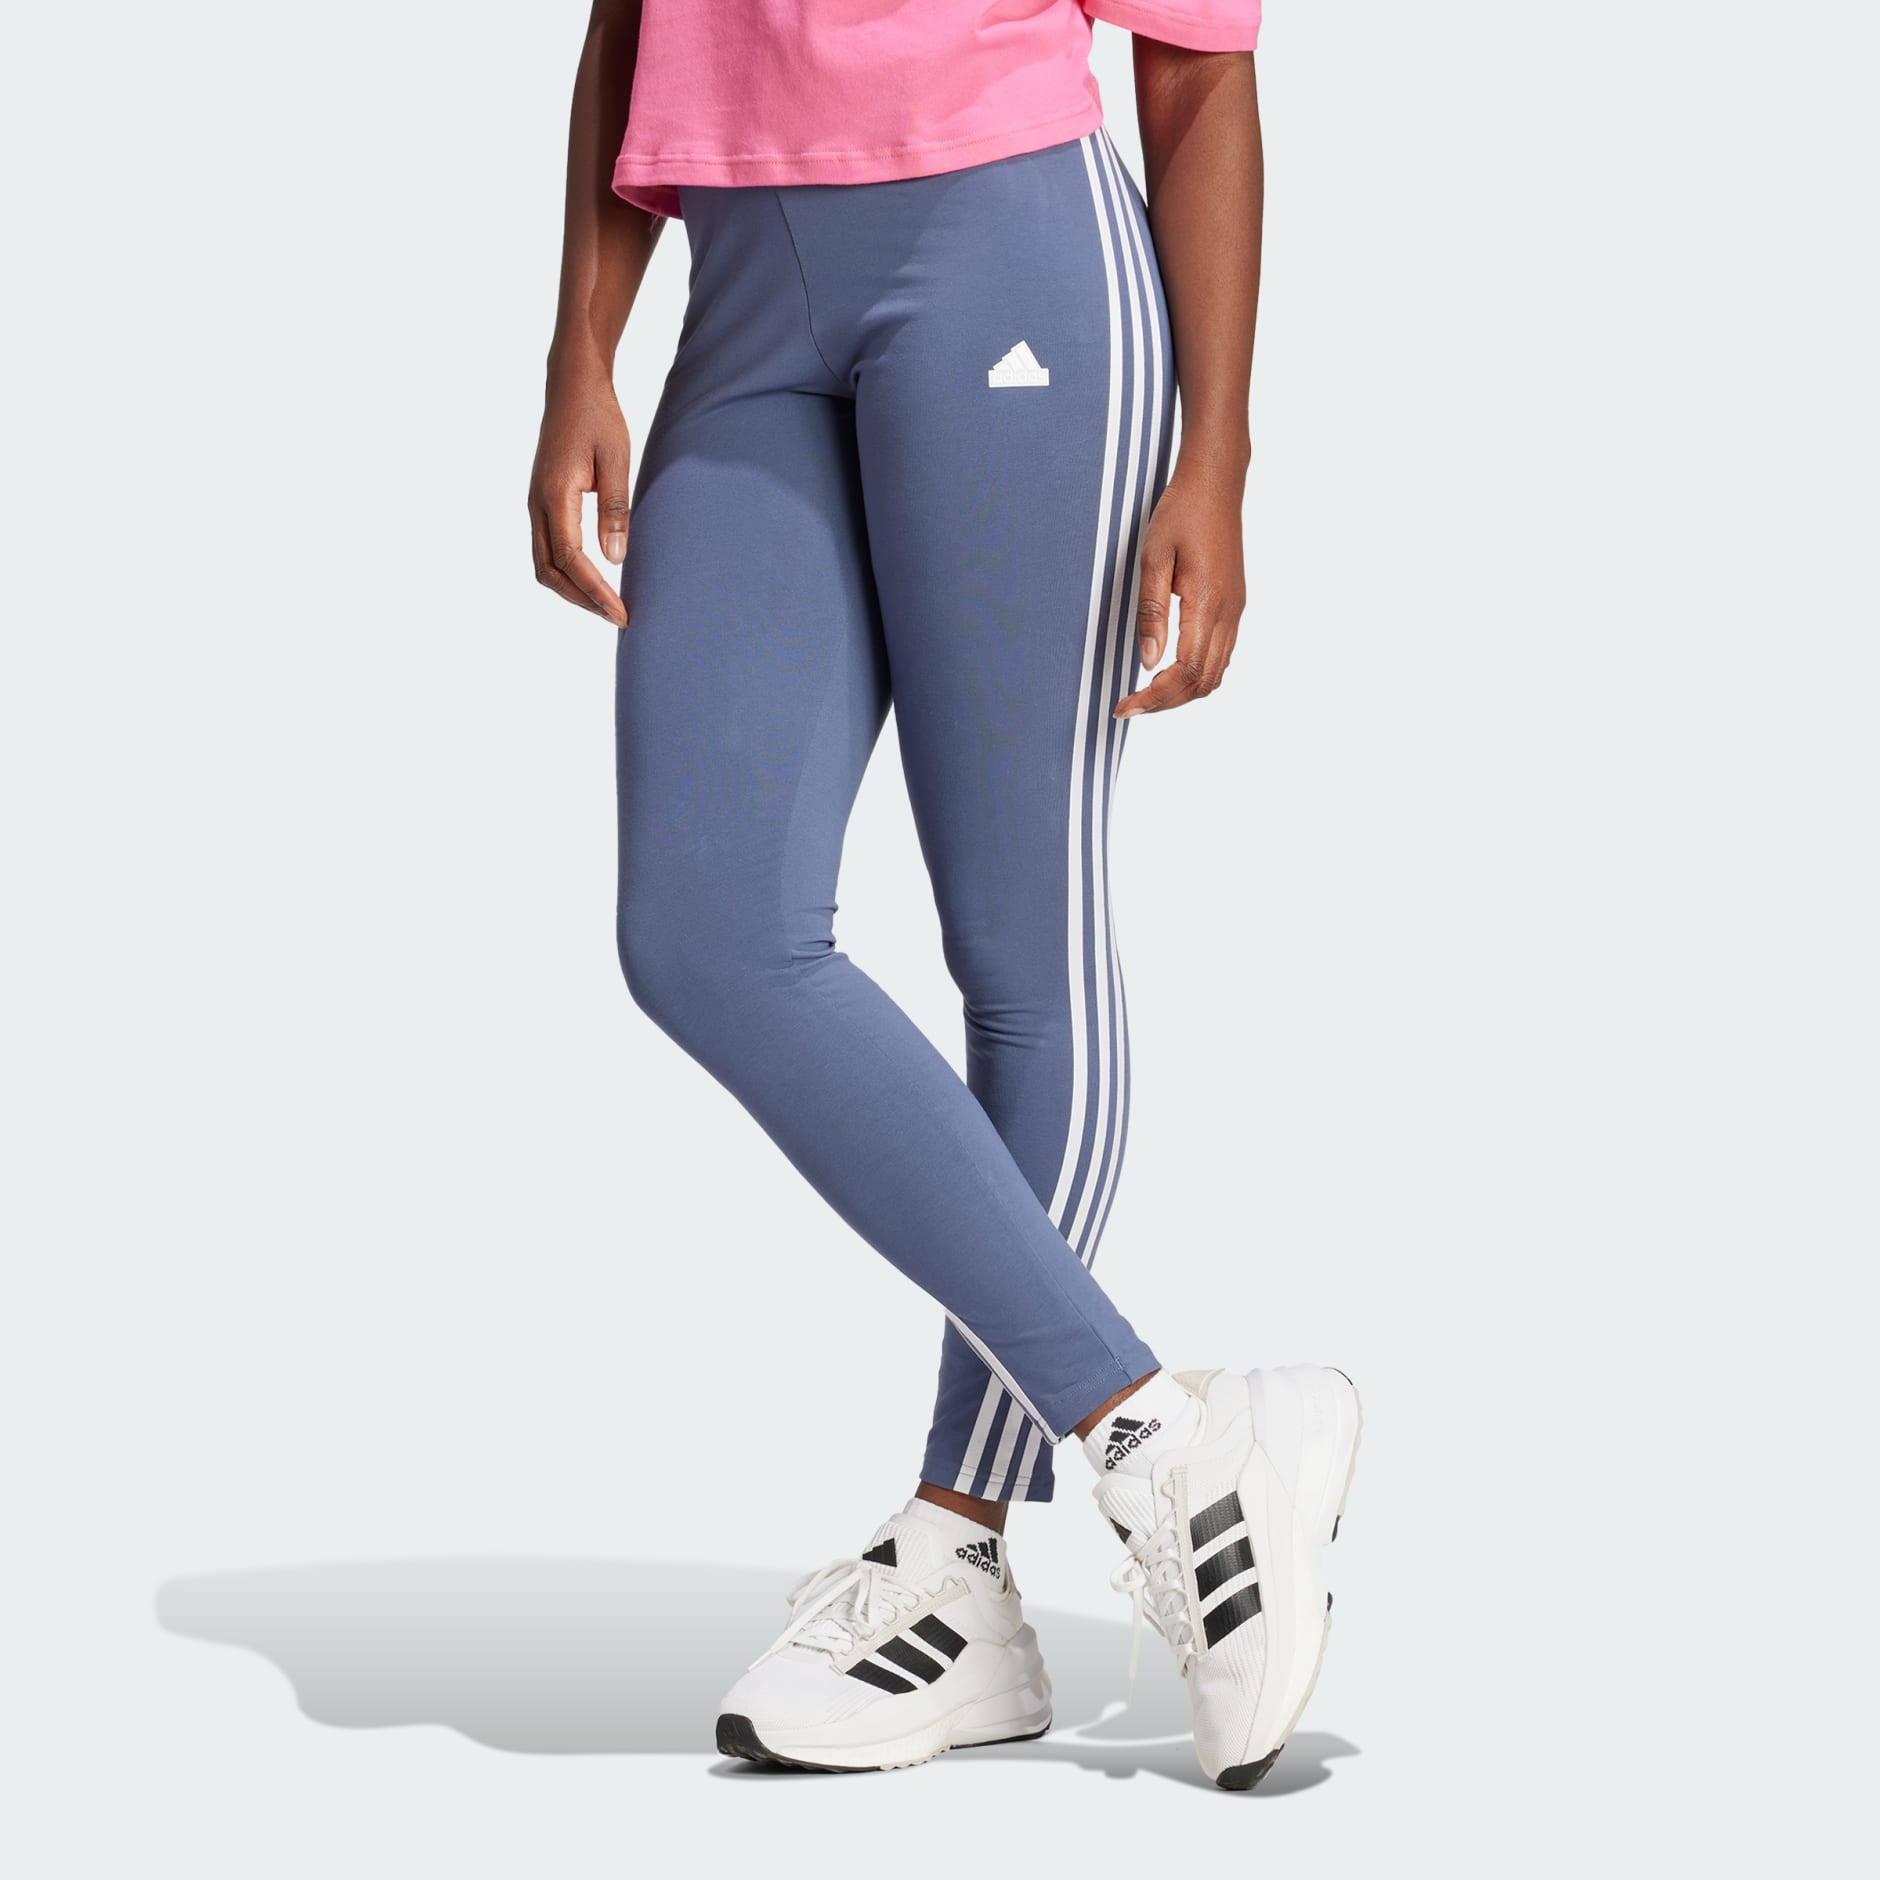 Buy ADIDAS Originals Women Charcoal Grey Solid Tights - Tights for Women  8810709 | Myntra